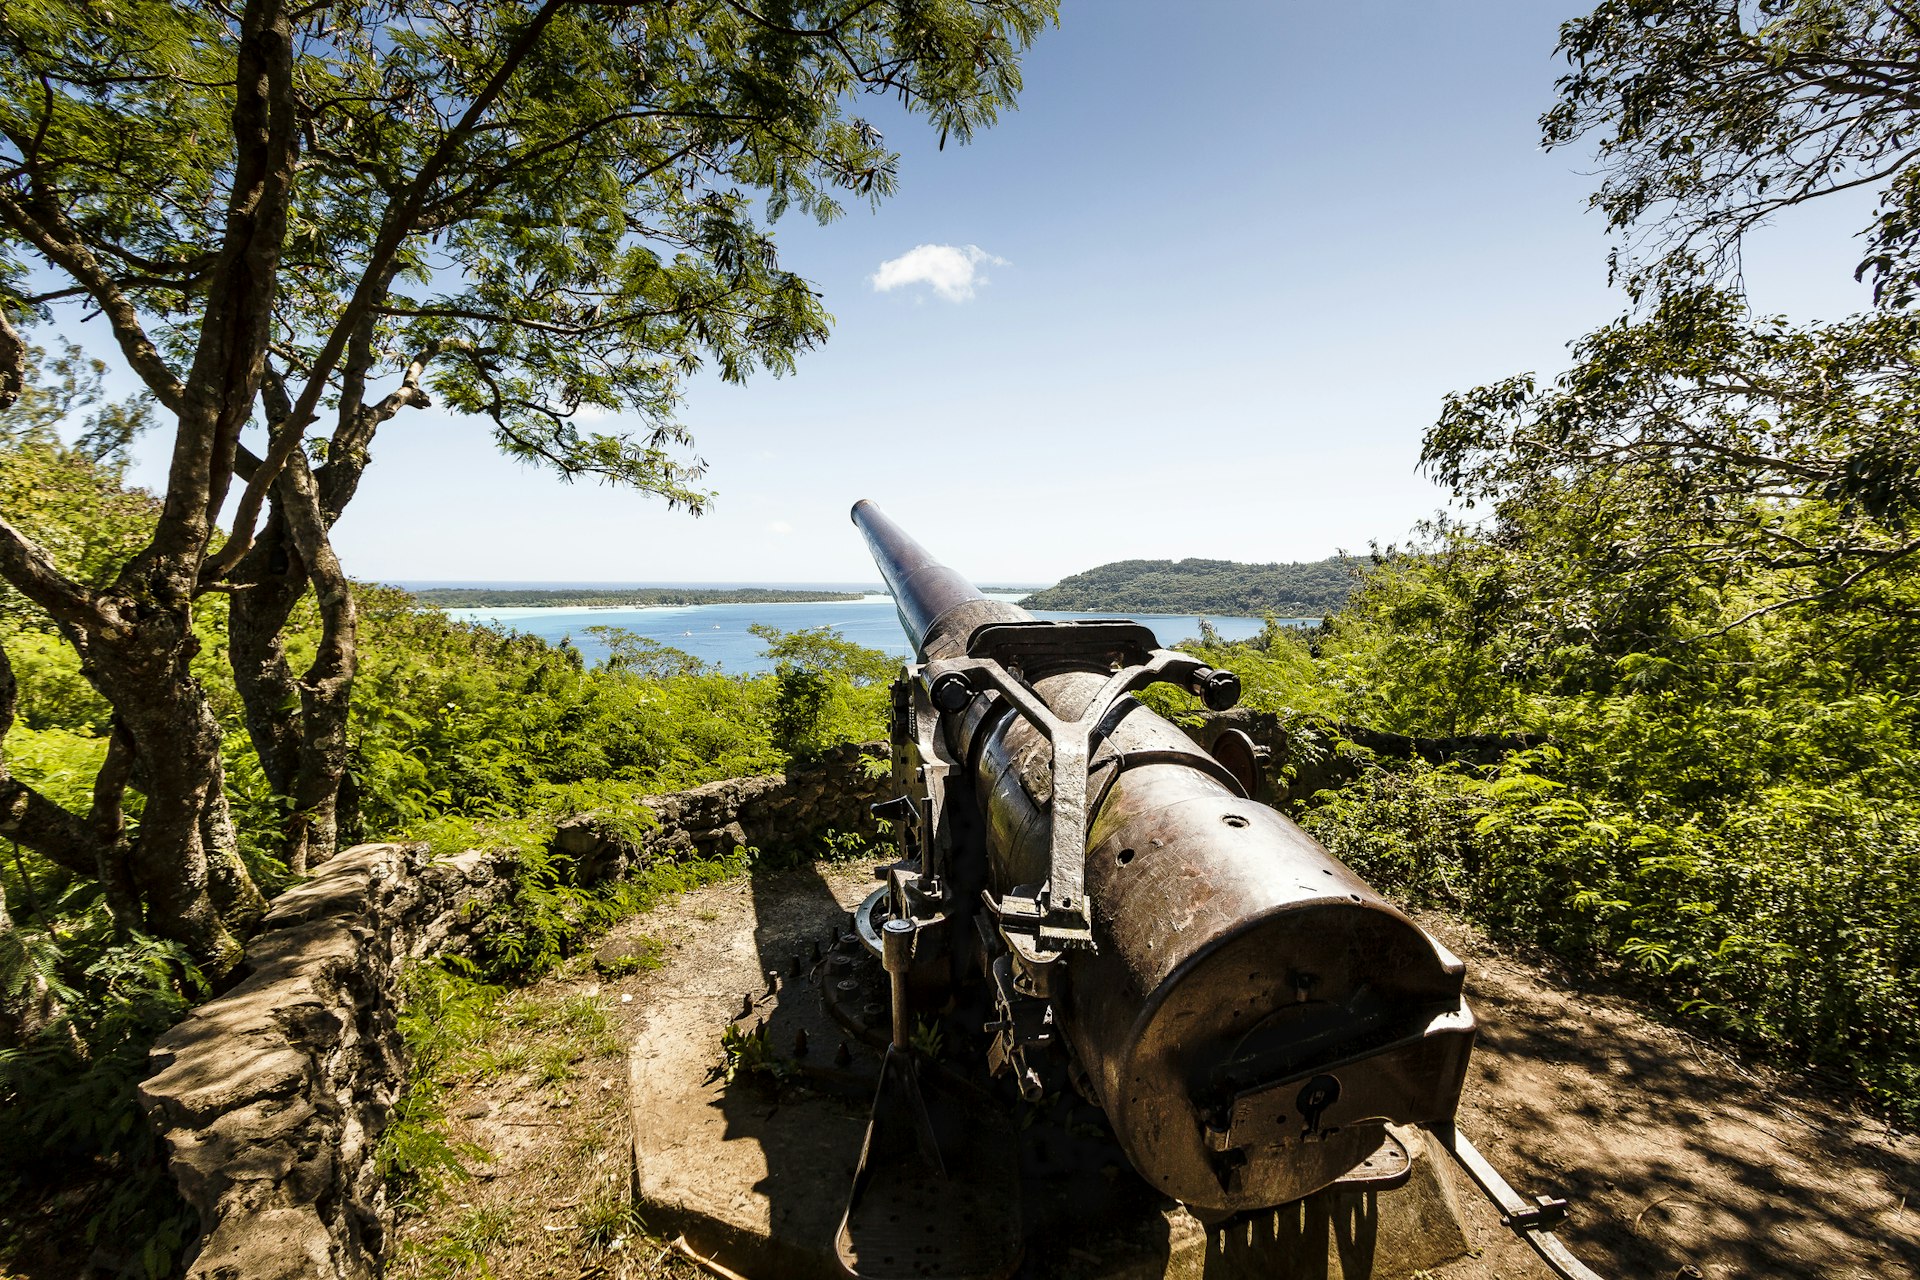 A World War II Cannon on a hilltop on the island of Bora Bora with beautiful views of the lagoon beyond